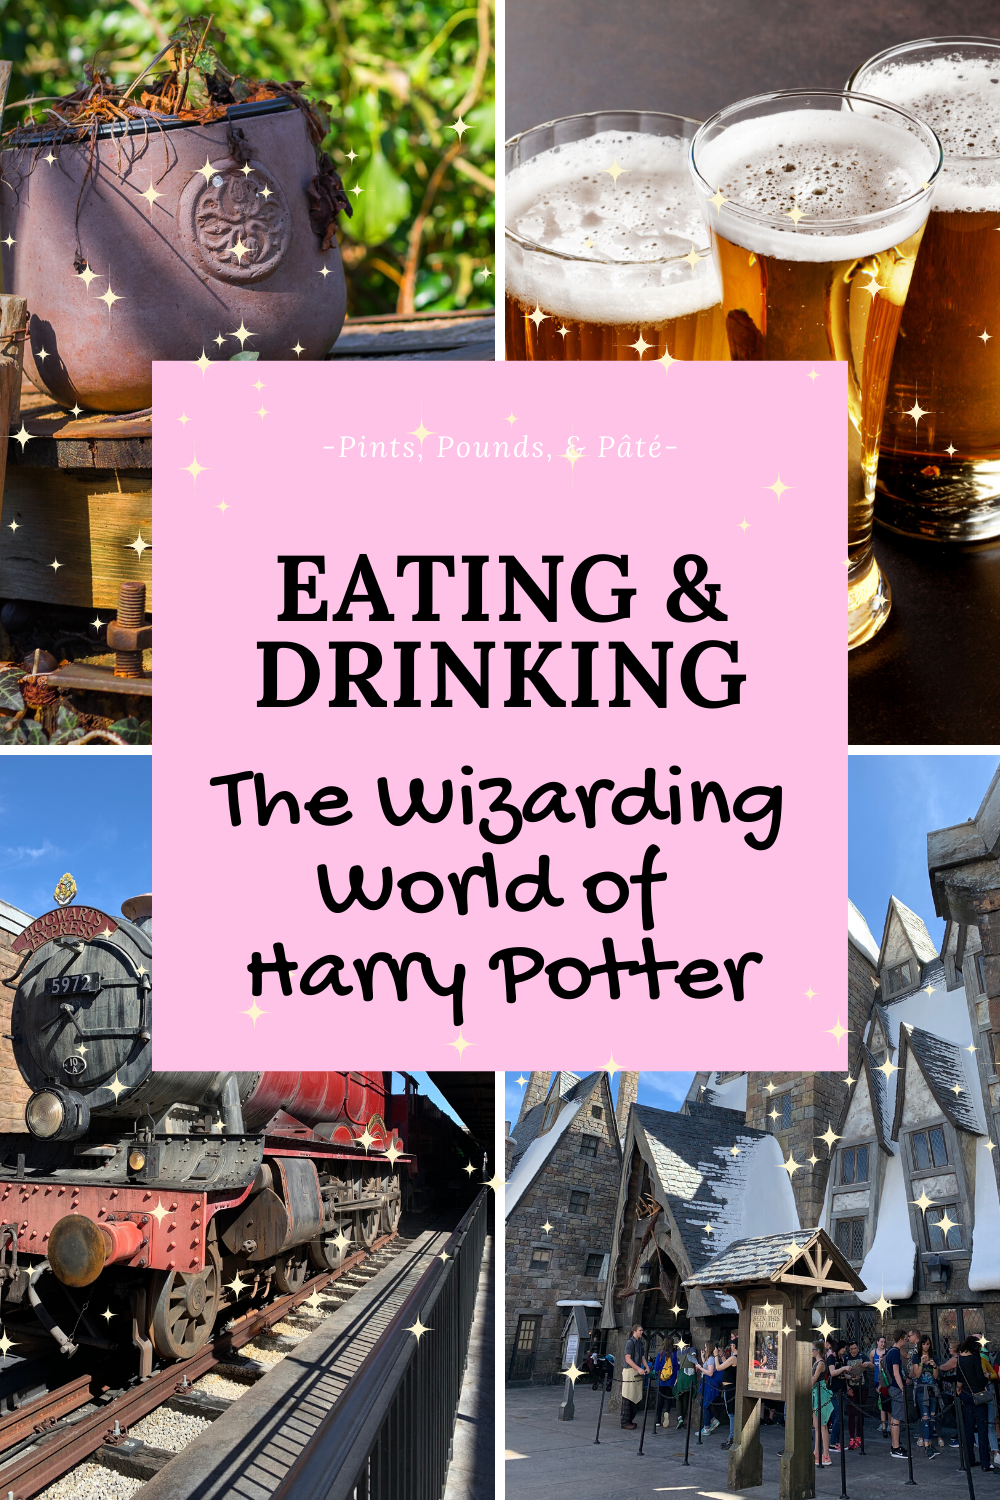 Where to eat and drink at the Wizarding World of Harry Potter